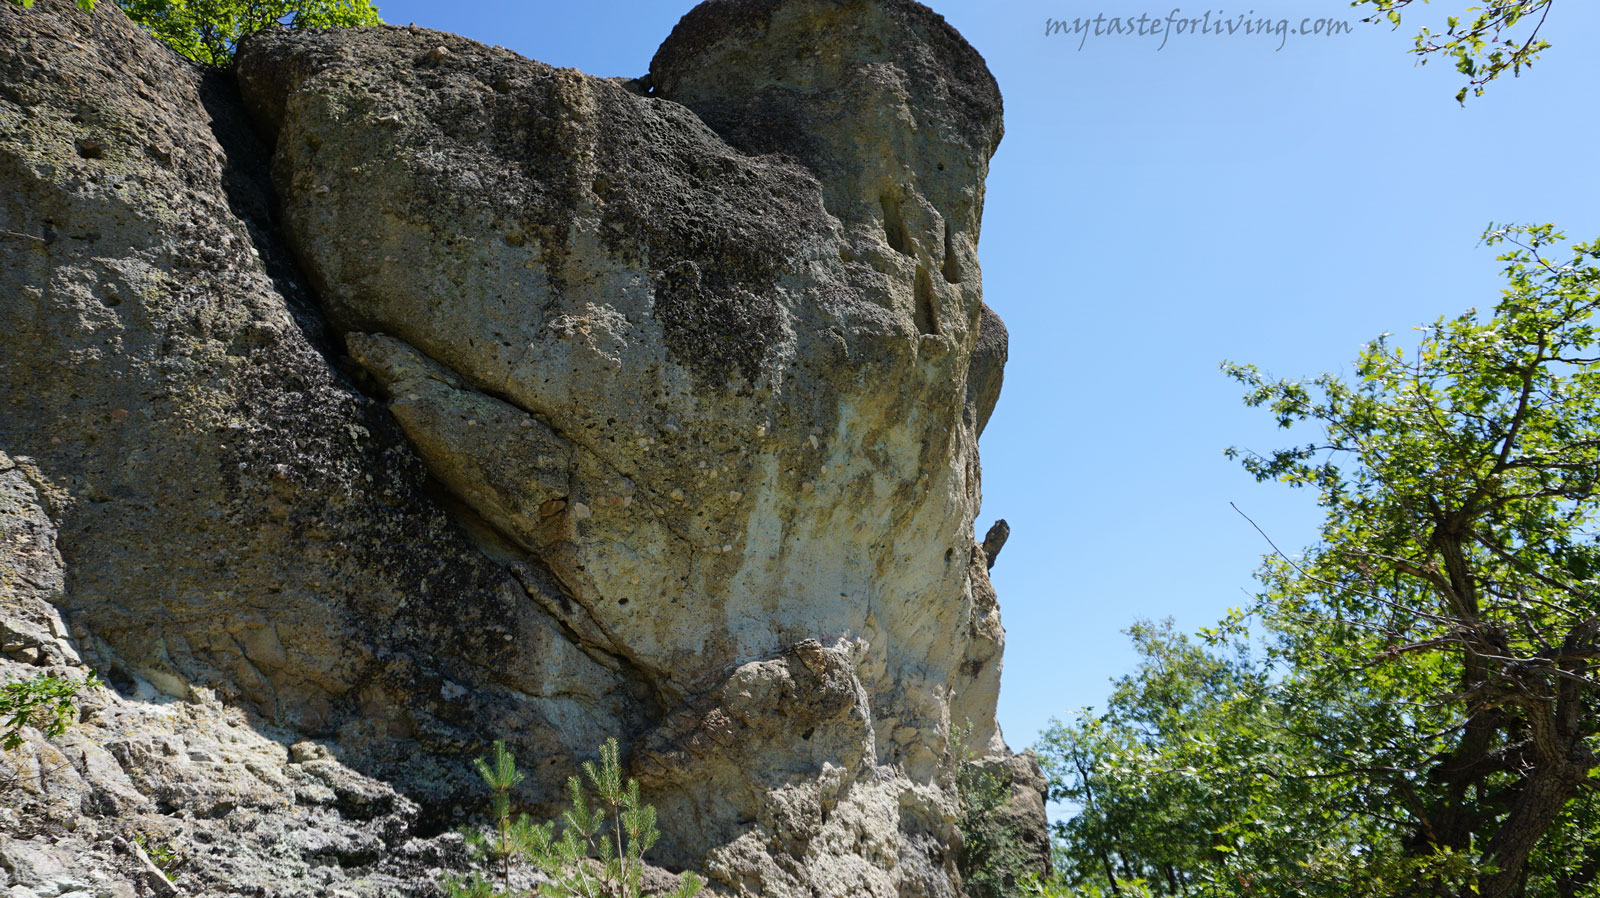 Parmak Kaya is a thracian rock sanctuary, located on the road Plovdiv-Kardzhali, near the village of Nochevo, reg. Kardzhali, Bulgaria. Its name comes from a large piece of rock that sticks out of it and resembles a finger.